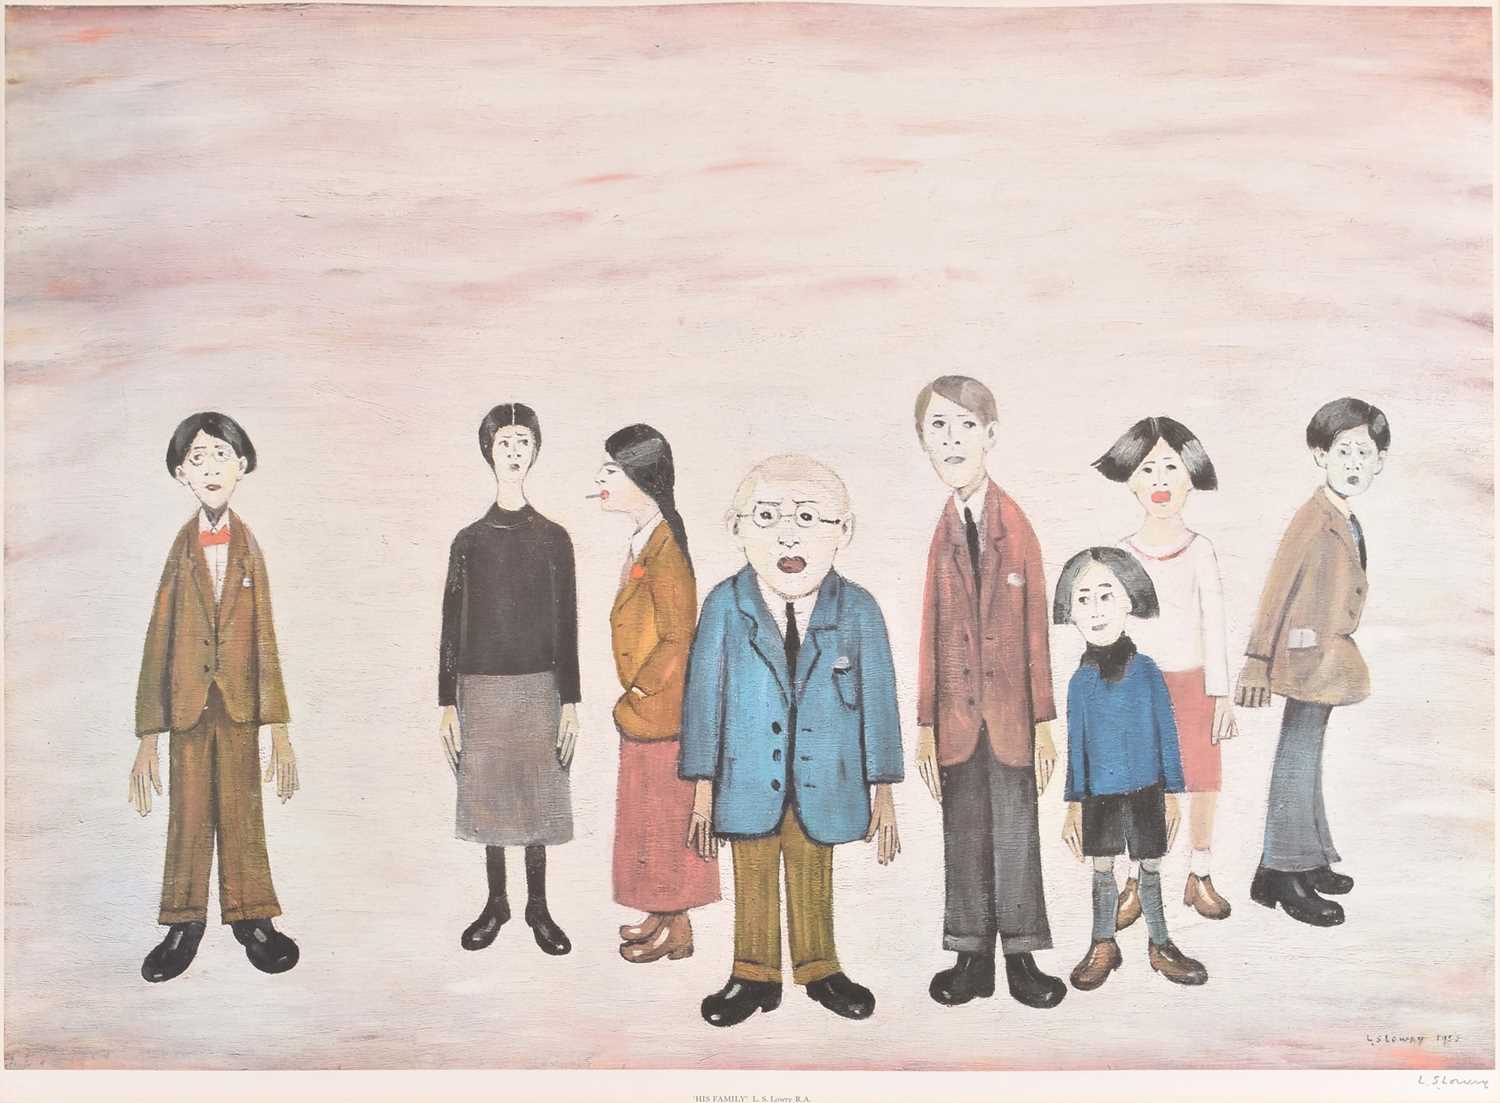 L.S. Lowry R.A. (British 1887-1976) "His Family"